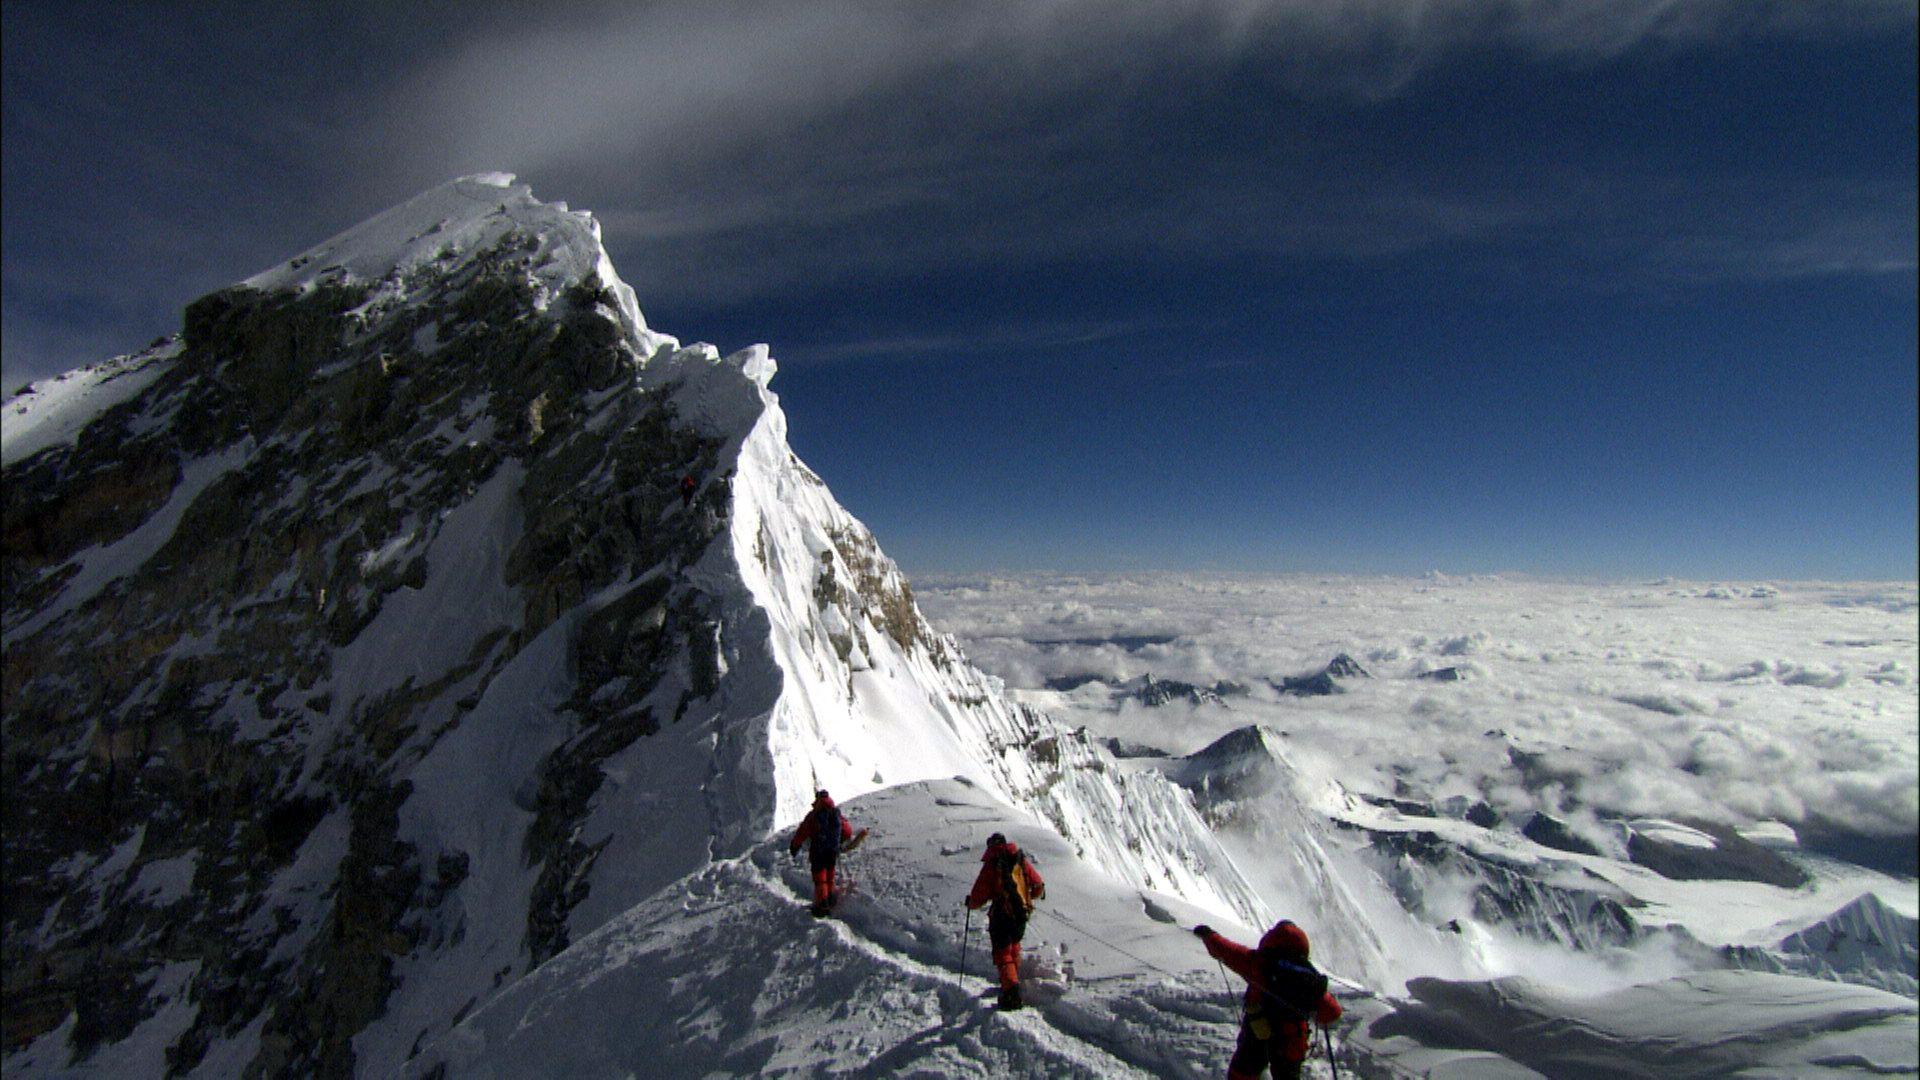 Mount Everest Wallpapers Top Free Mount Everest Backgrounds